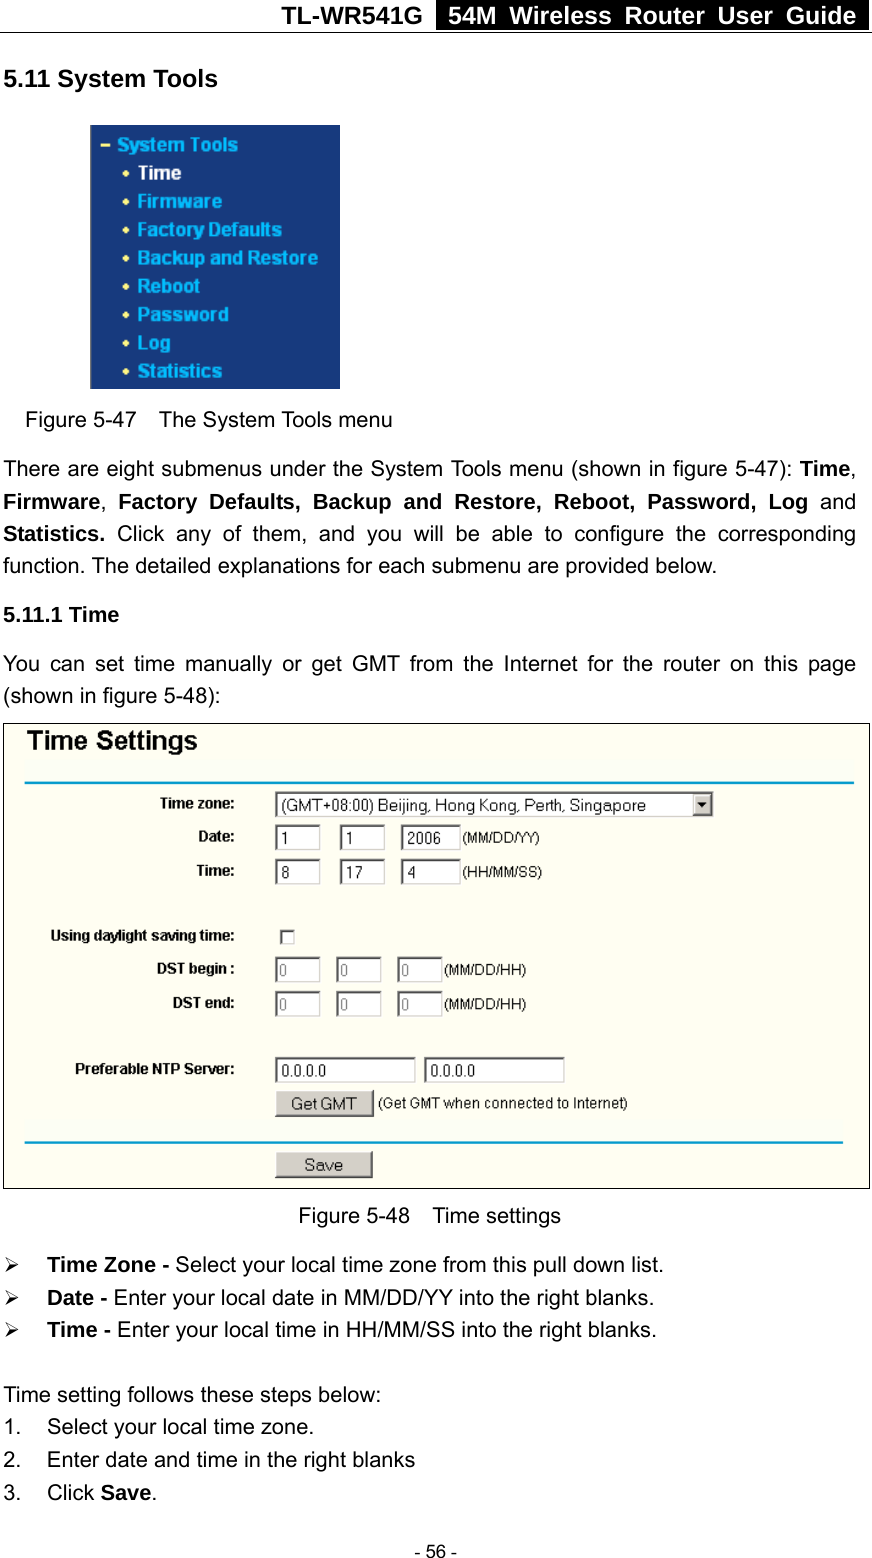 TL-WR541G   54M Wireless Router User Guide  5.11 System Tools  Figure 5-47  The System Tools menu There are eight submenus under the System Tools menu (shown in figure 5-47): Time, Firmware,  Factory Defaults, Backup and Restore, Reboot, Password, Log and Statistics.  Click any of them, and you will be able to configure the corresponding function. The detailed explanations for each submenu are provided below. 5.11.1 Time You can set time manually or get GMT from the Internet for the router on this page (shown in figure 5-48):  Figure 5-48  Time settings ¾ Time Zone - Select your local time zone from this pull down list. ¾ Date - Enter your local date in MM/DD/YY into the right blanks. ¾ Time - Enter your local time in HH/MM/SS into the right blanks.  Time setting follows these steps below: 1.  Select your local time zone. 2.  Enter date and time in the right blanks 3. Click Save.  - 56 - 